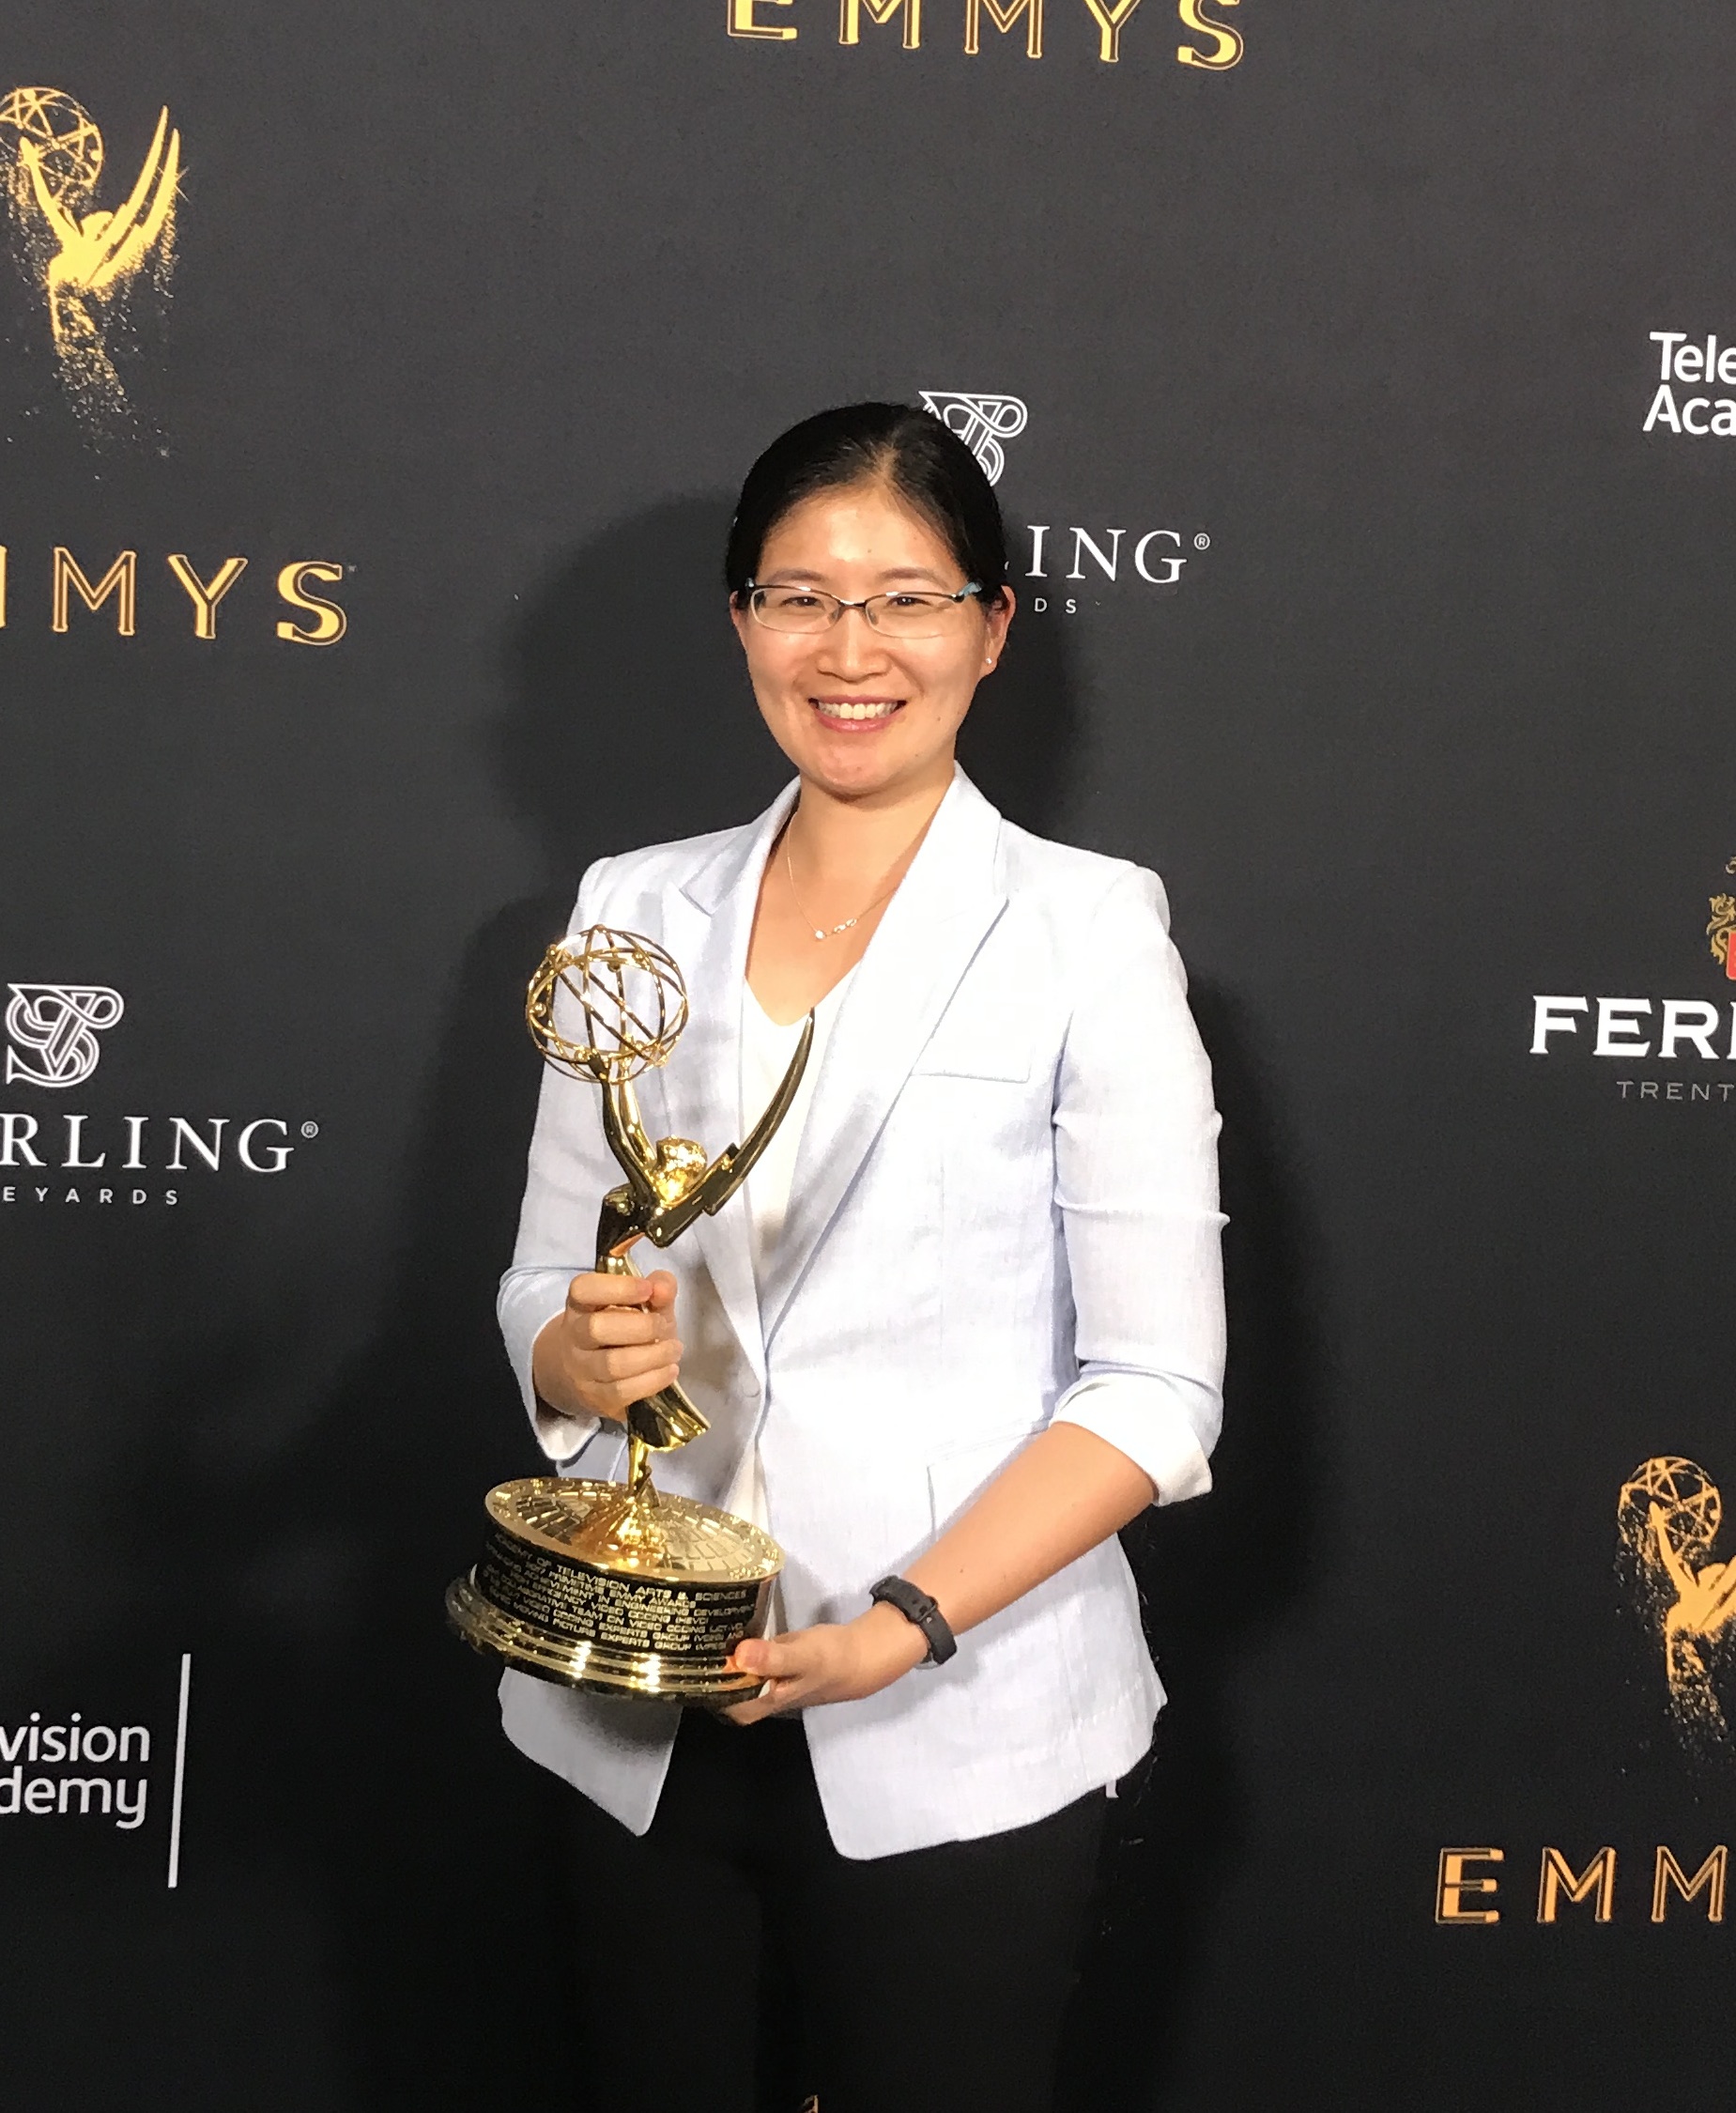 Vivienne Sze shares Engineering Emmy Award with colleagues